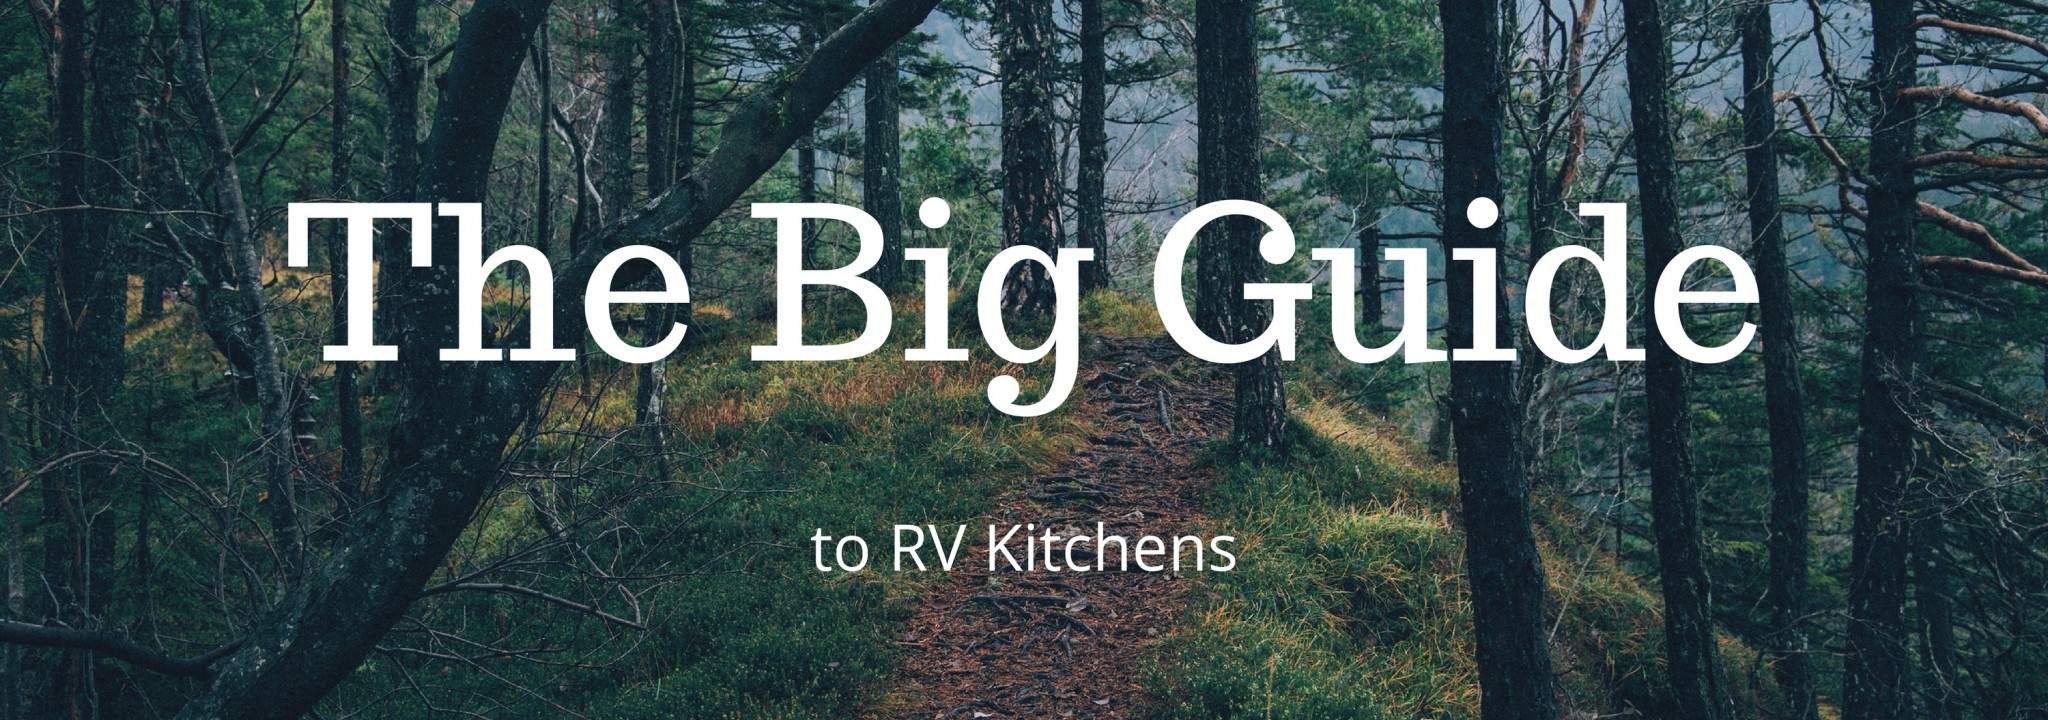 The Big Guide to RV Kitchens